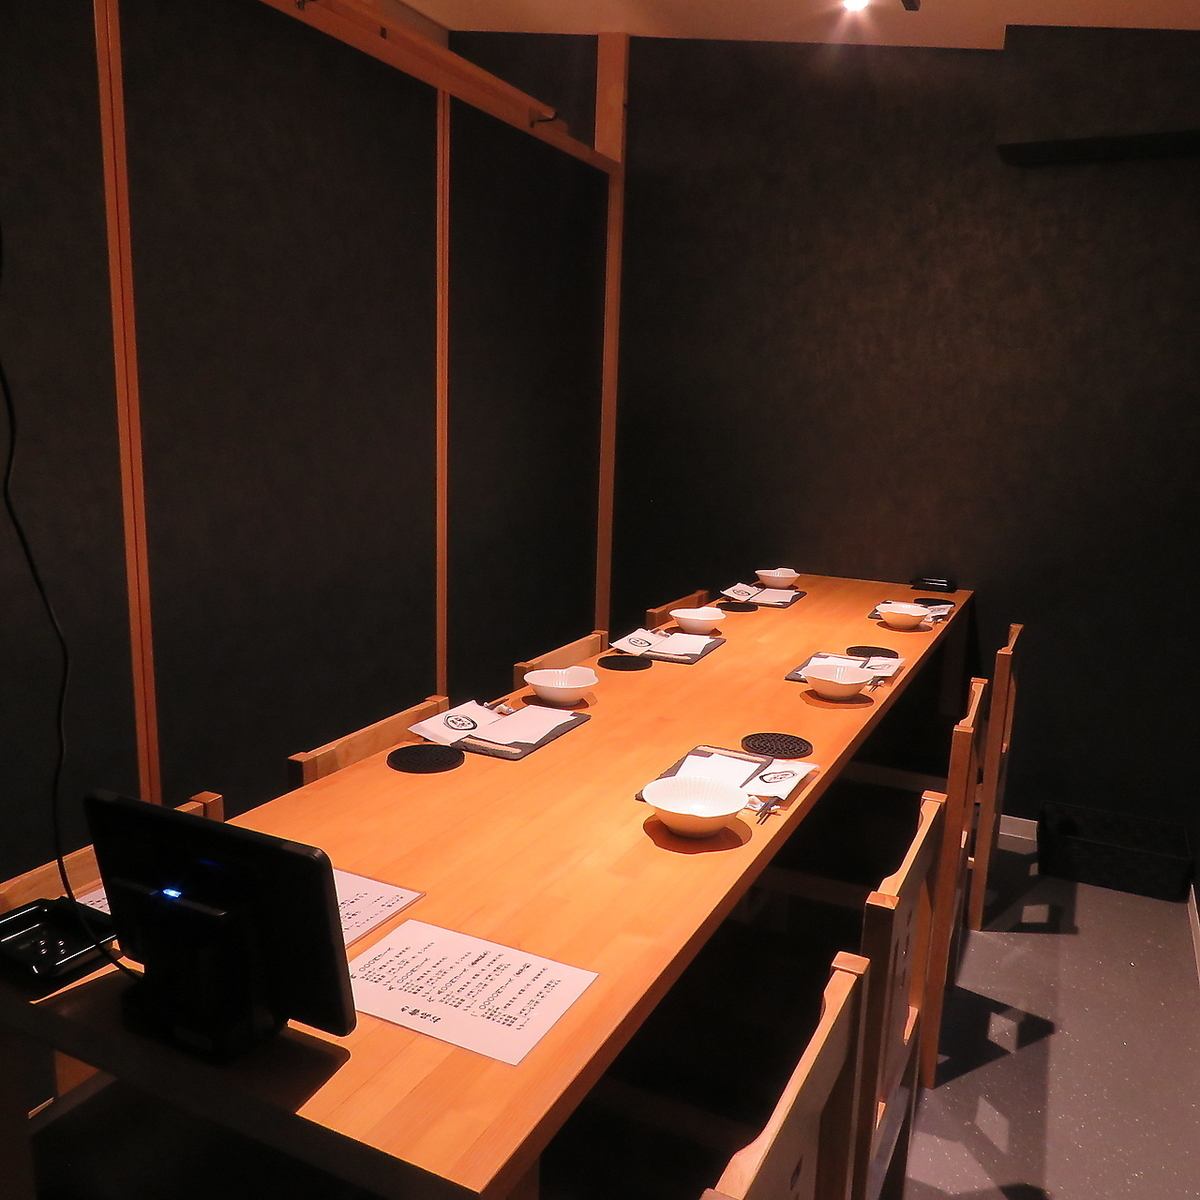 We have 7 completely private rooms that can accommodate 2 to 24 people.For entertainment and anniversaries♪